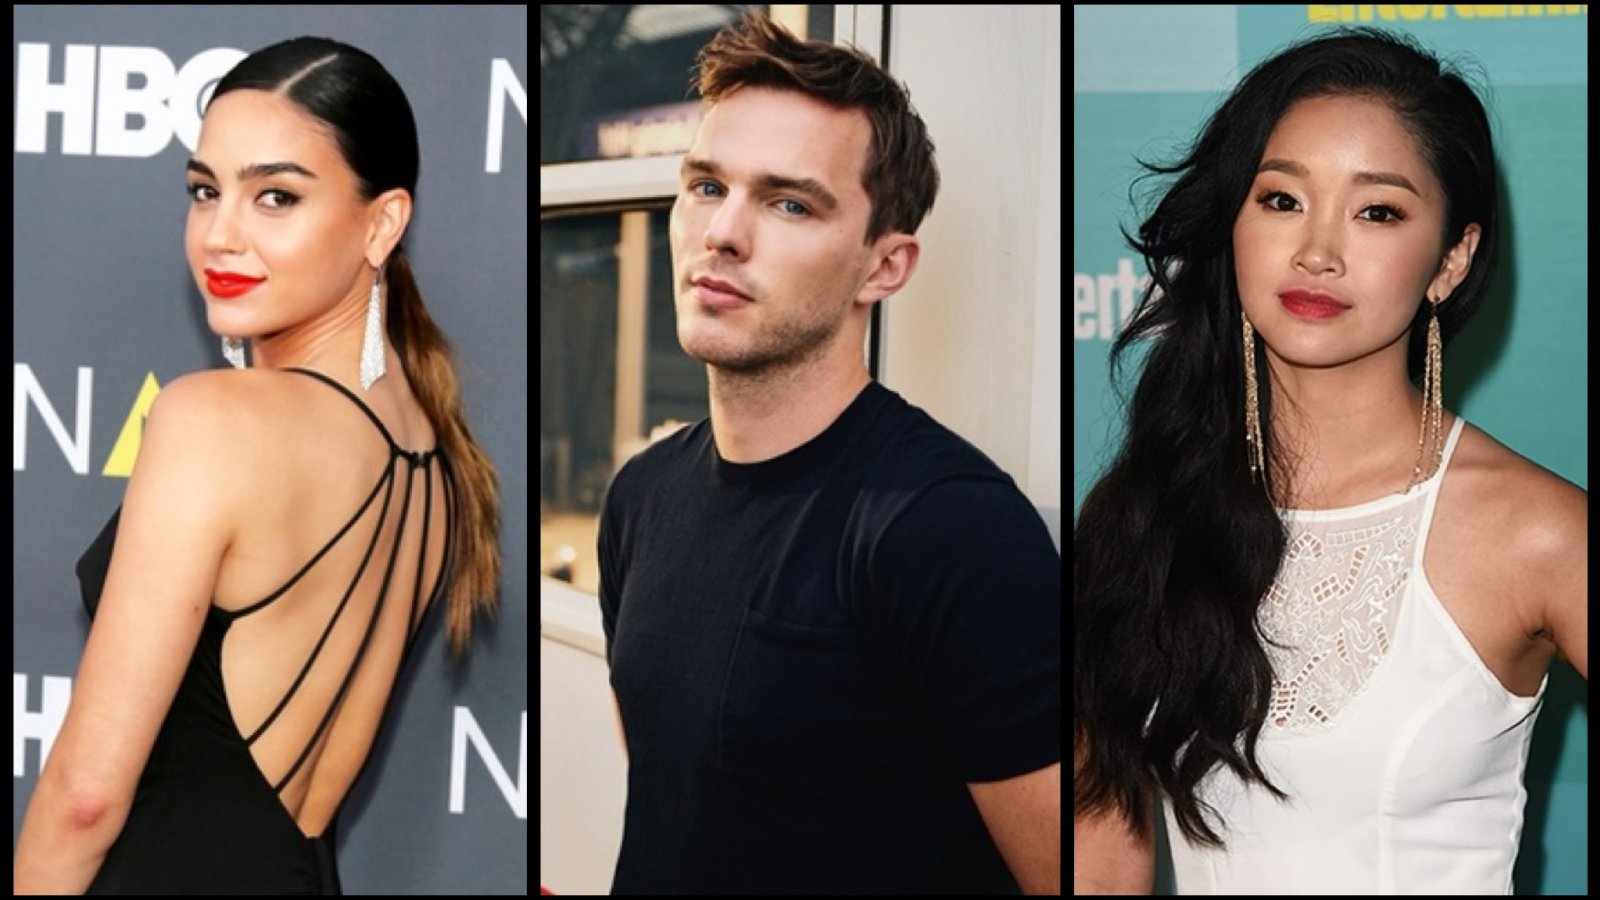 Nicholas Hoult, Melissa Barrera and Lana Condor are the protagonists of the new horror The One